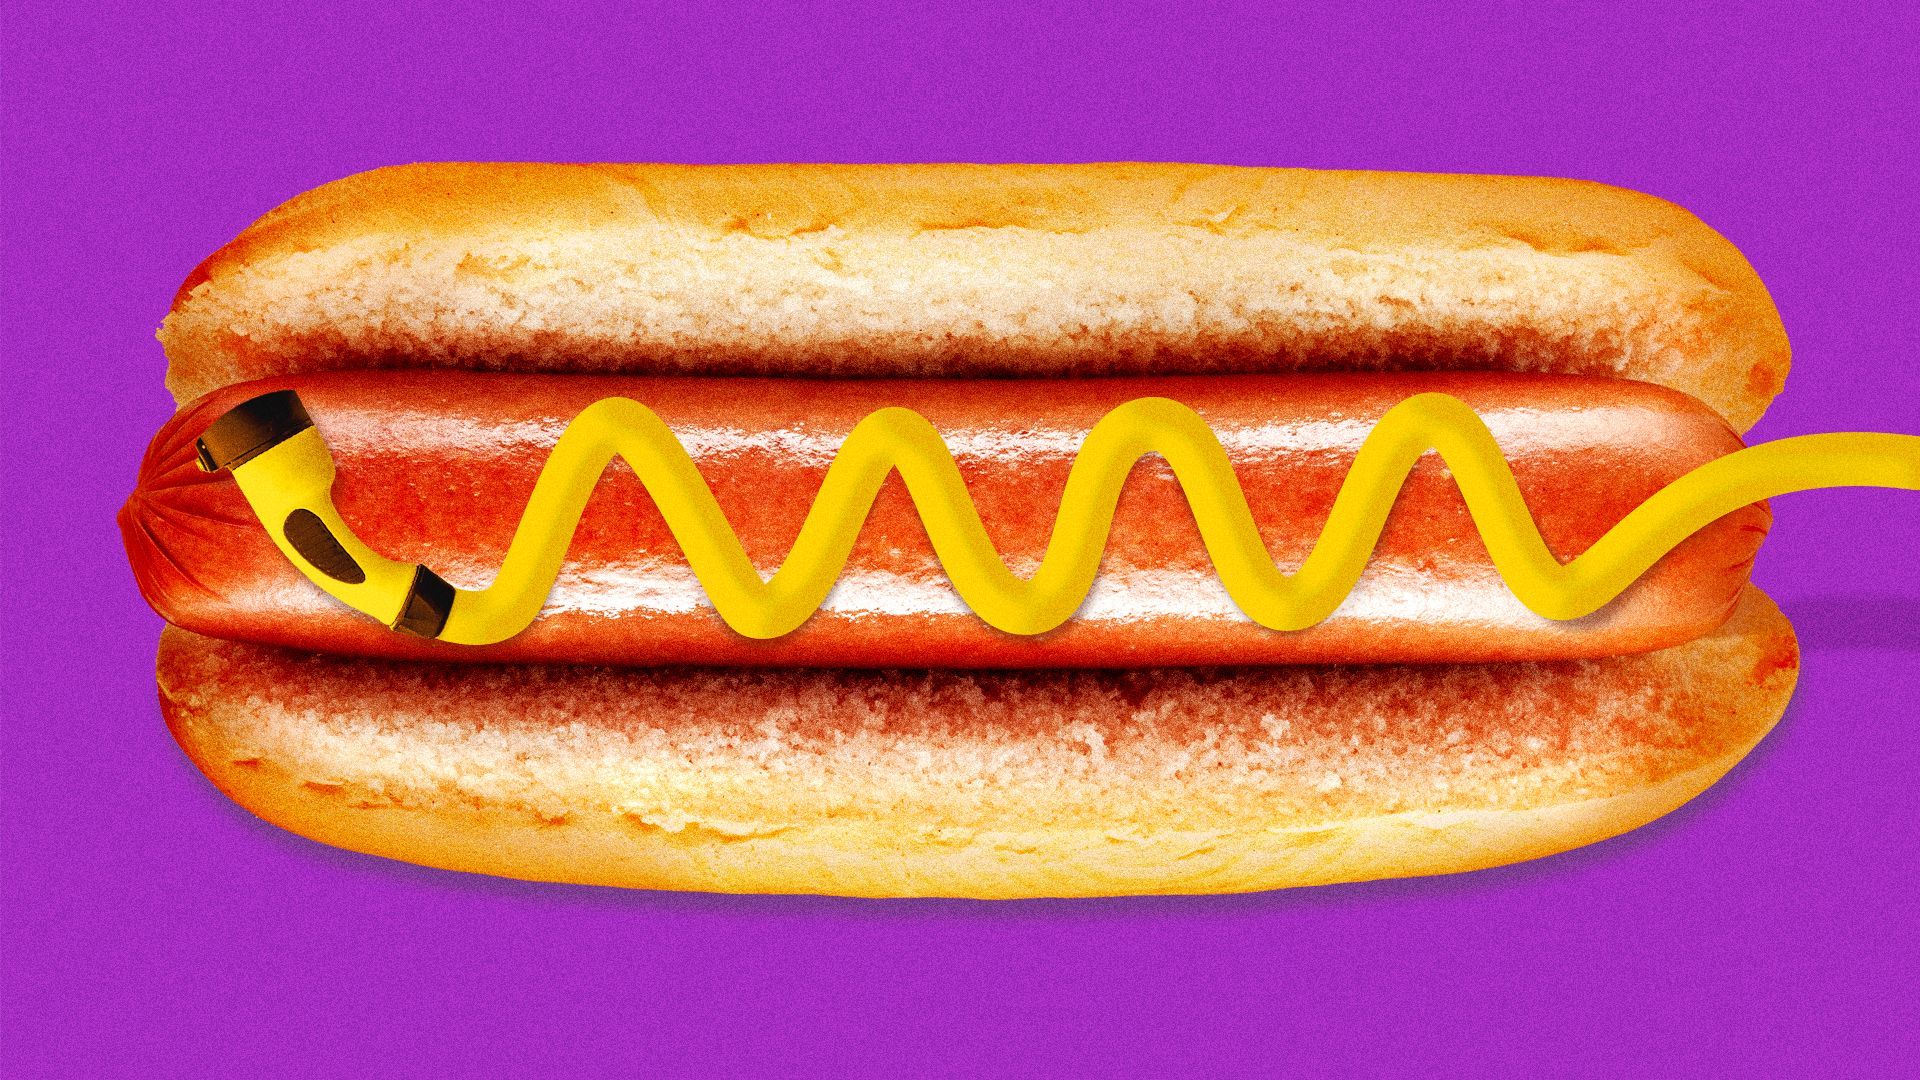 Illustration of a hot dog with mustard made from an electric vehicle charger.